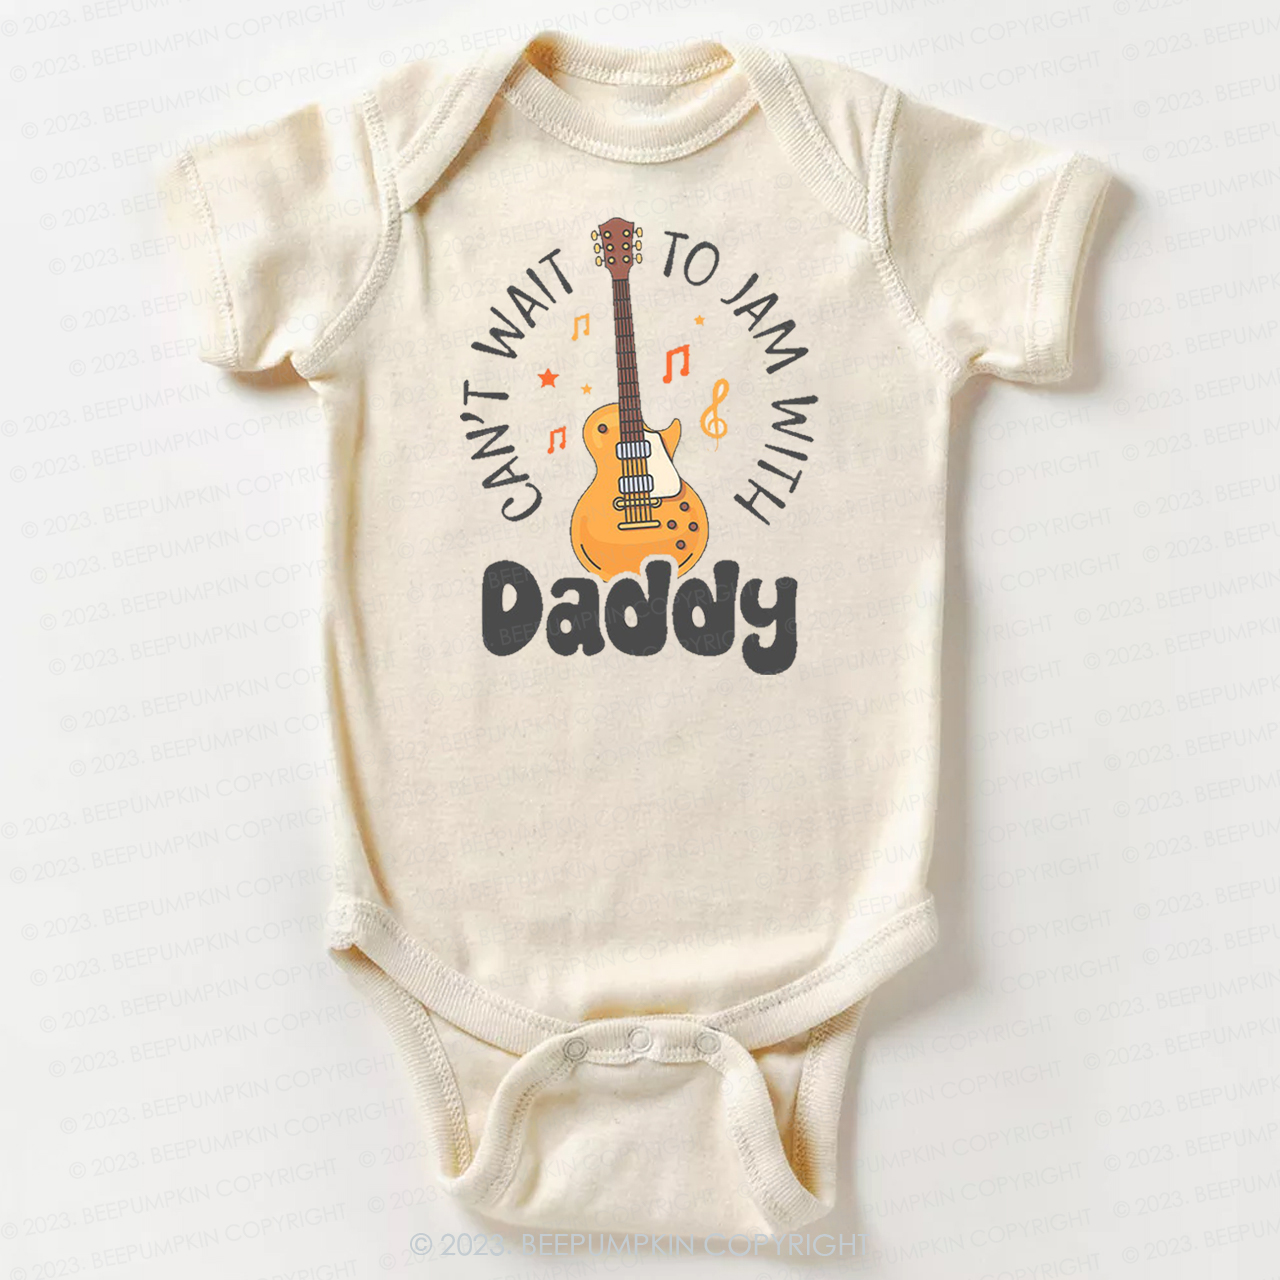 Can't Wait To Jam With Daddy Bodysuit For Baby